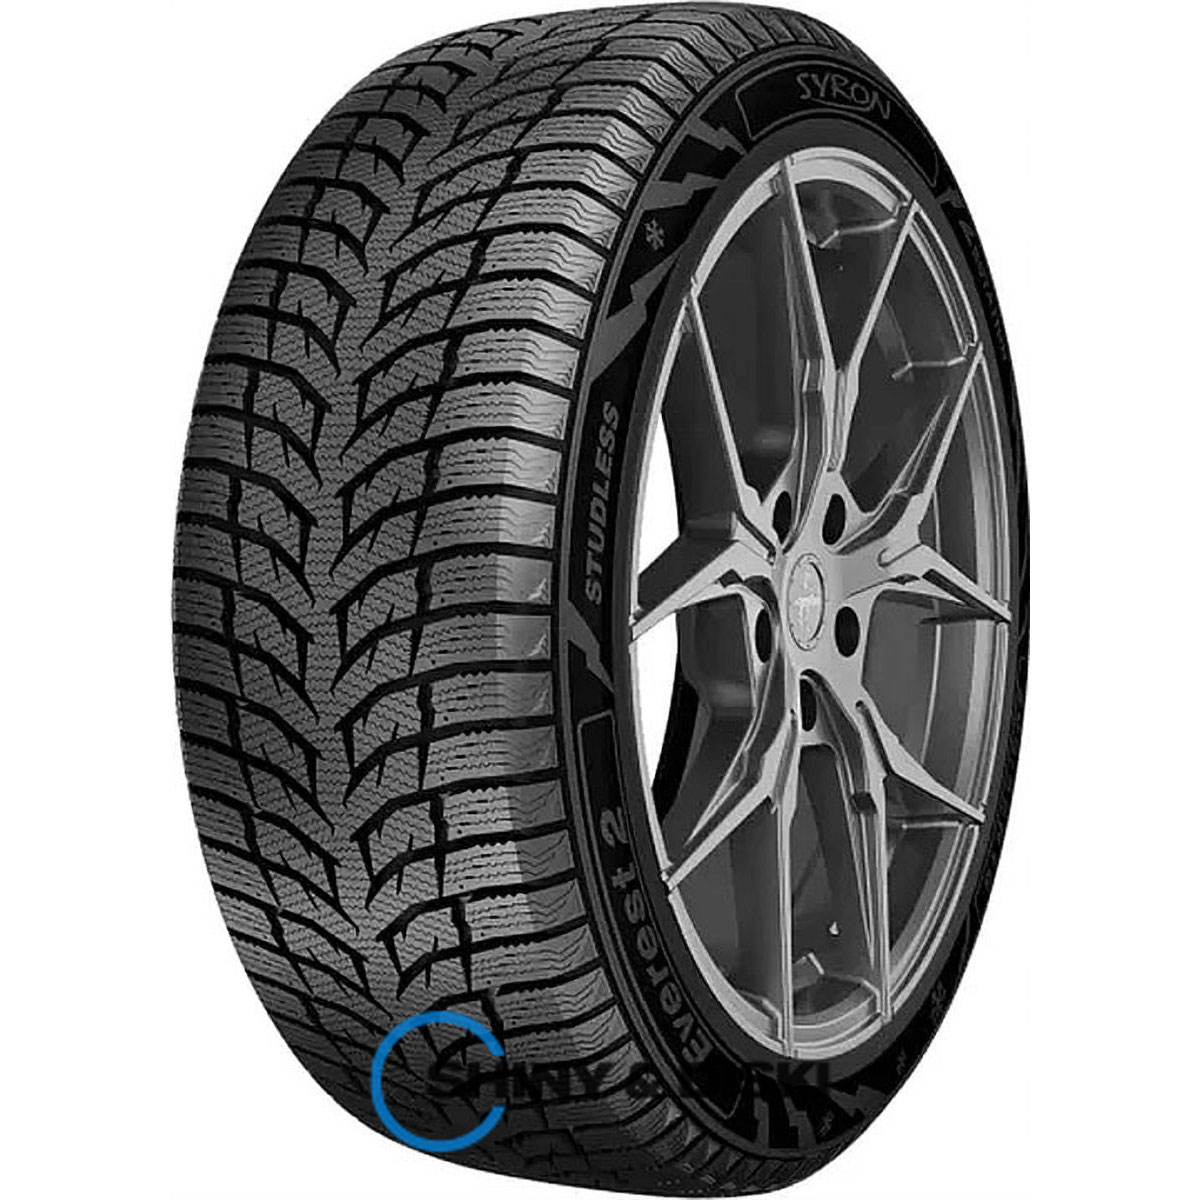 syron everest 2 165/70 r14 81t